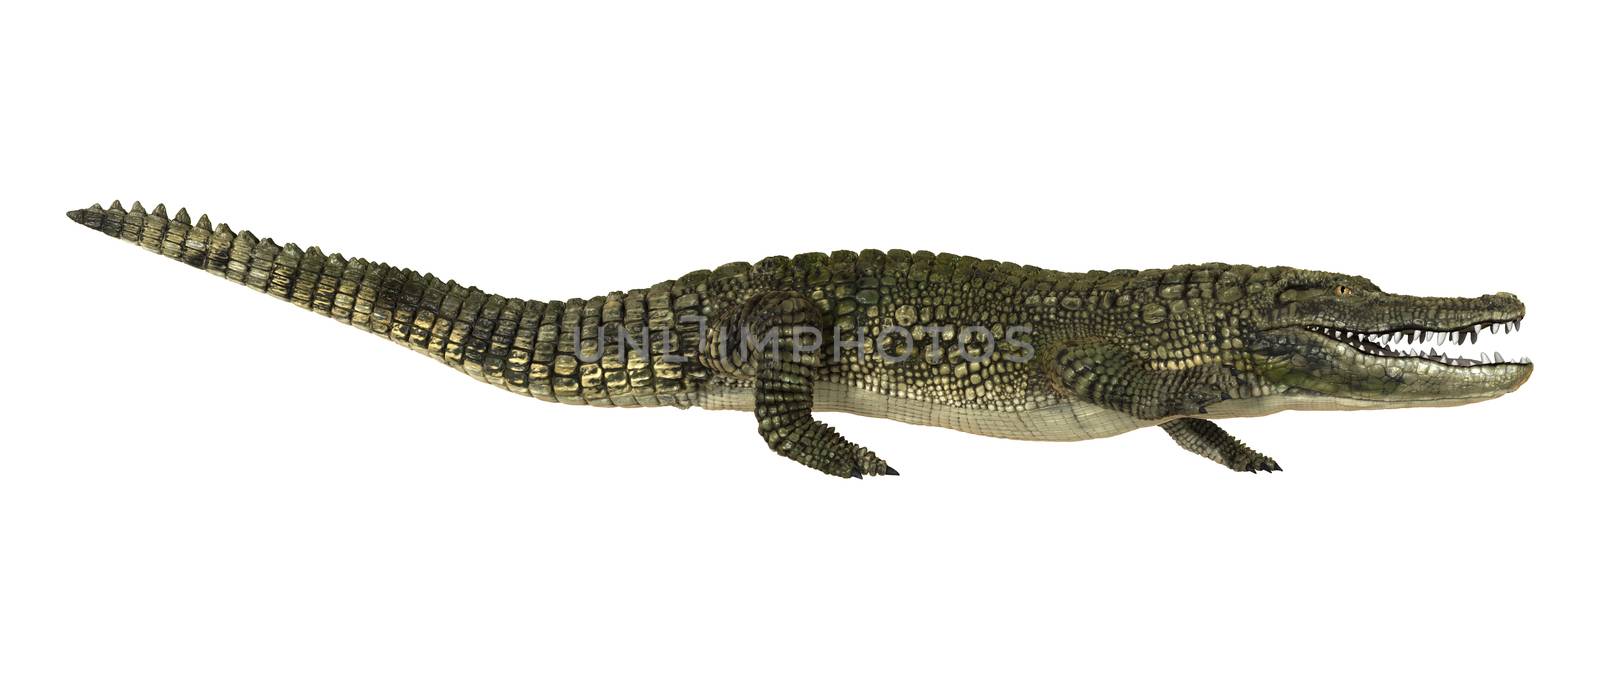 3D digital render of an American alligator or Alligator mississippiensis isolated on white background